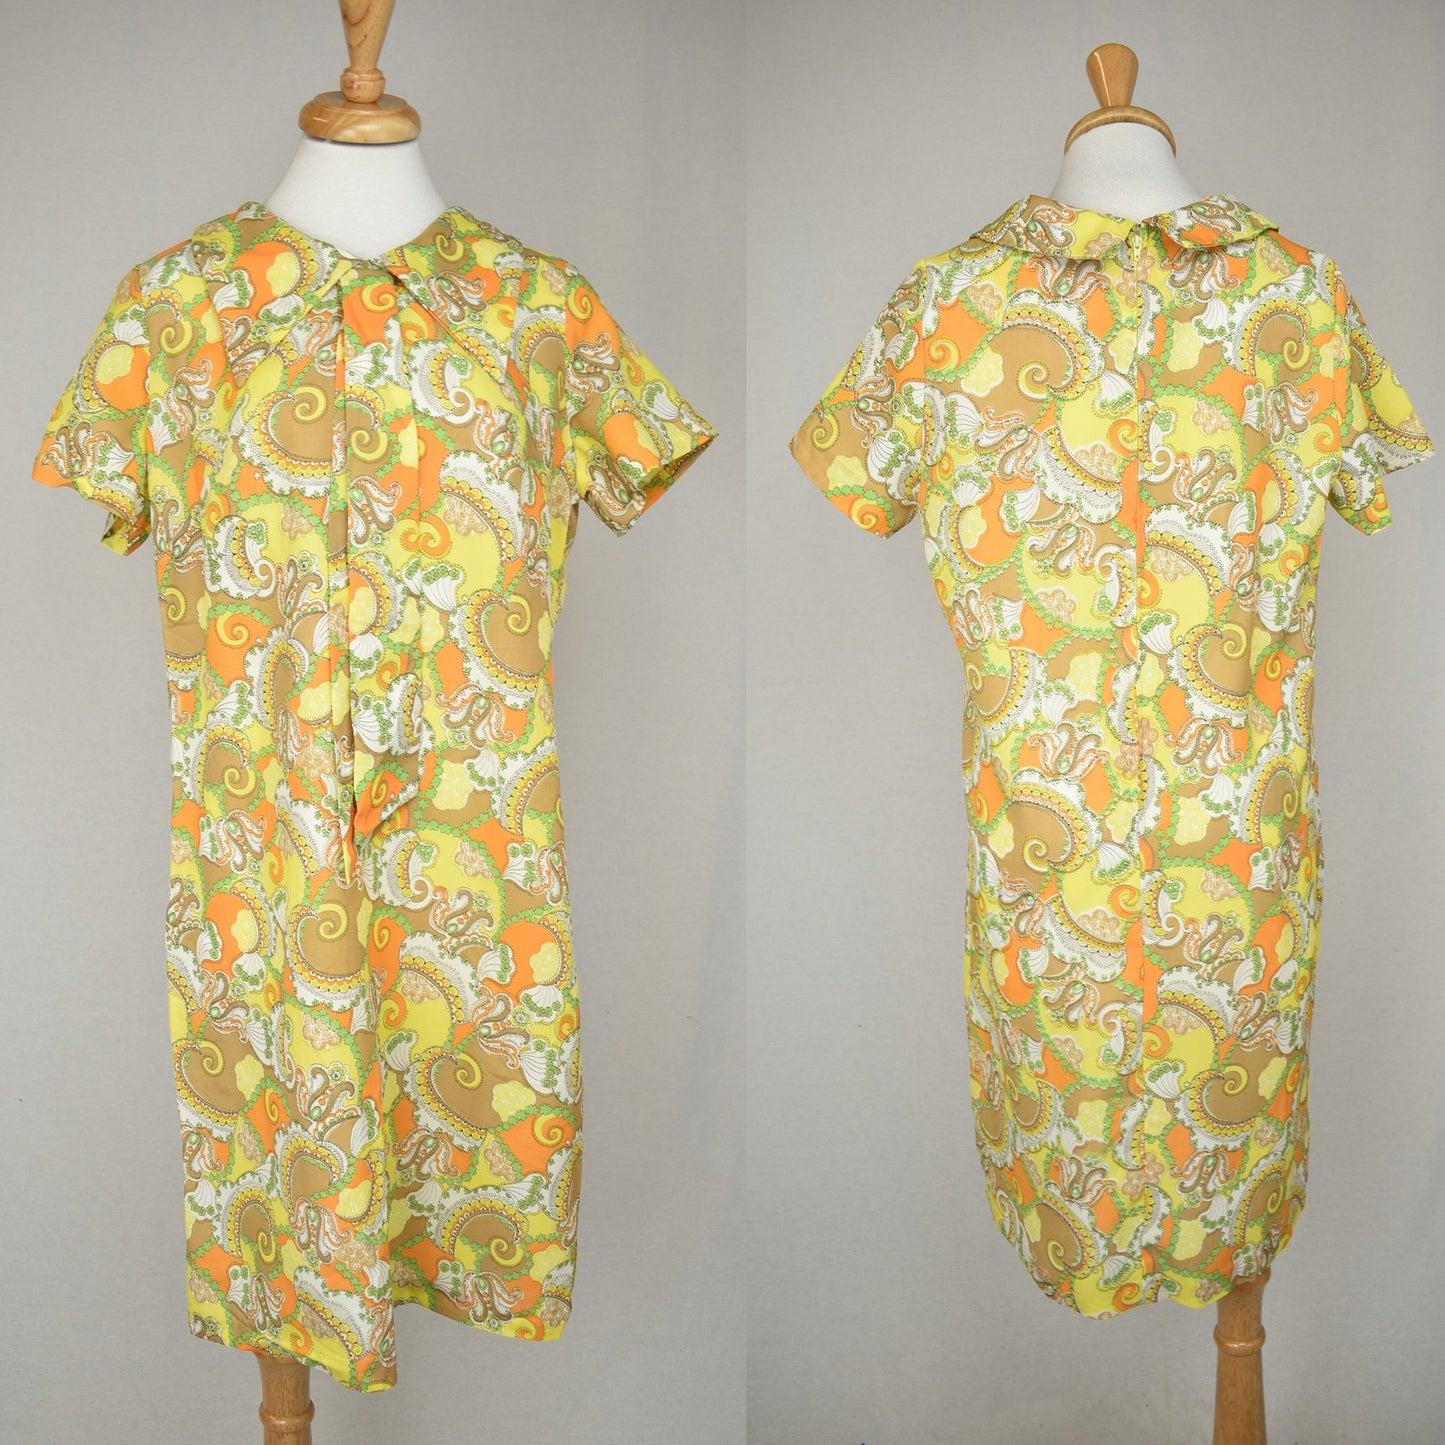 Vintage Swinging 60s Dress - Fun Psychedelic Pattern - Big Collar & Bow